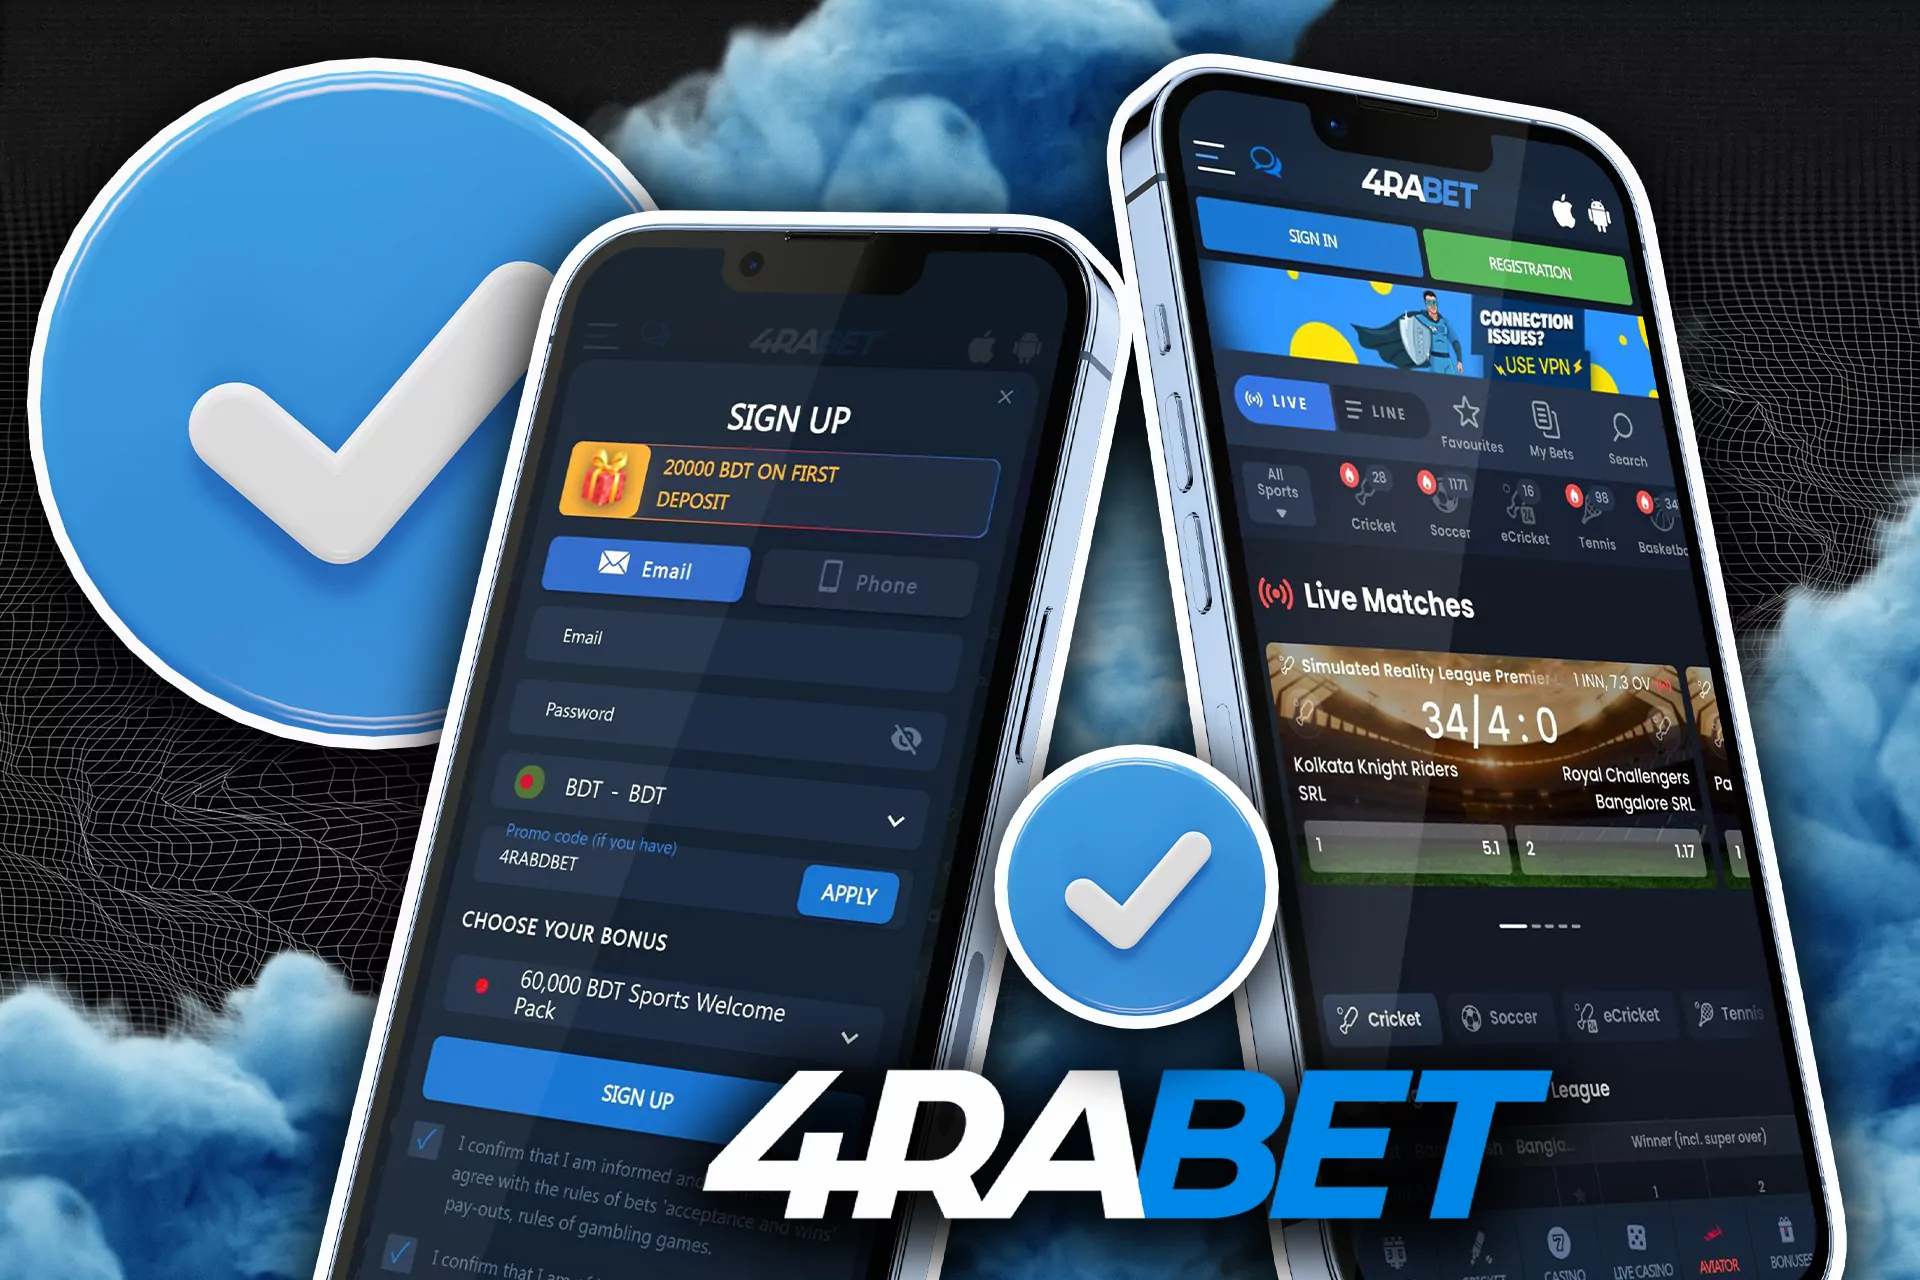 Download the 4rabet app for quicker access to sports betting and casino games.